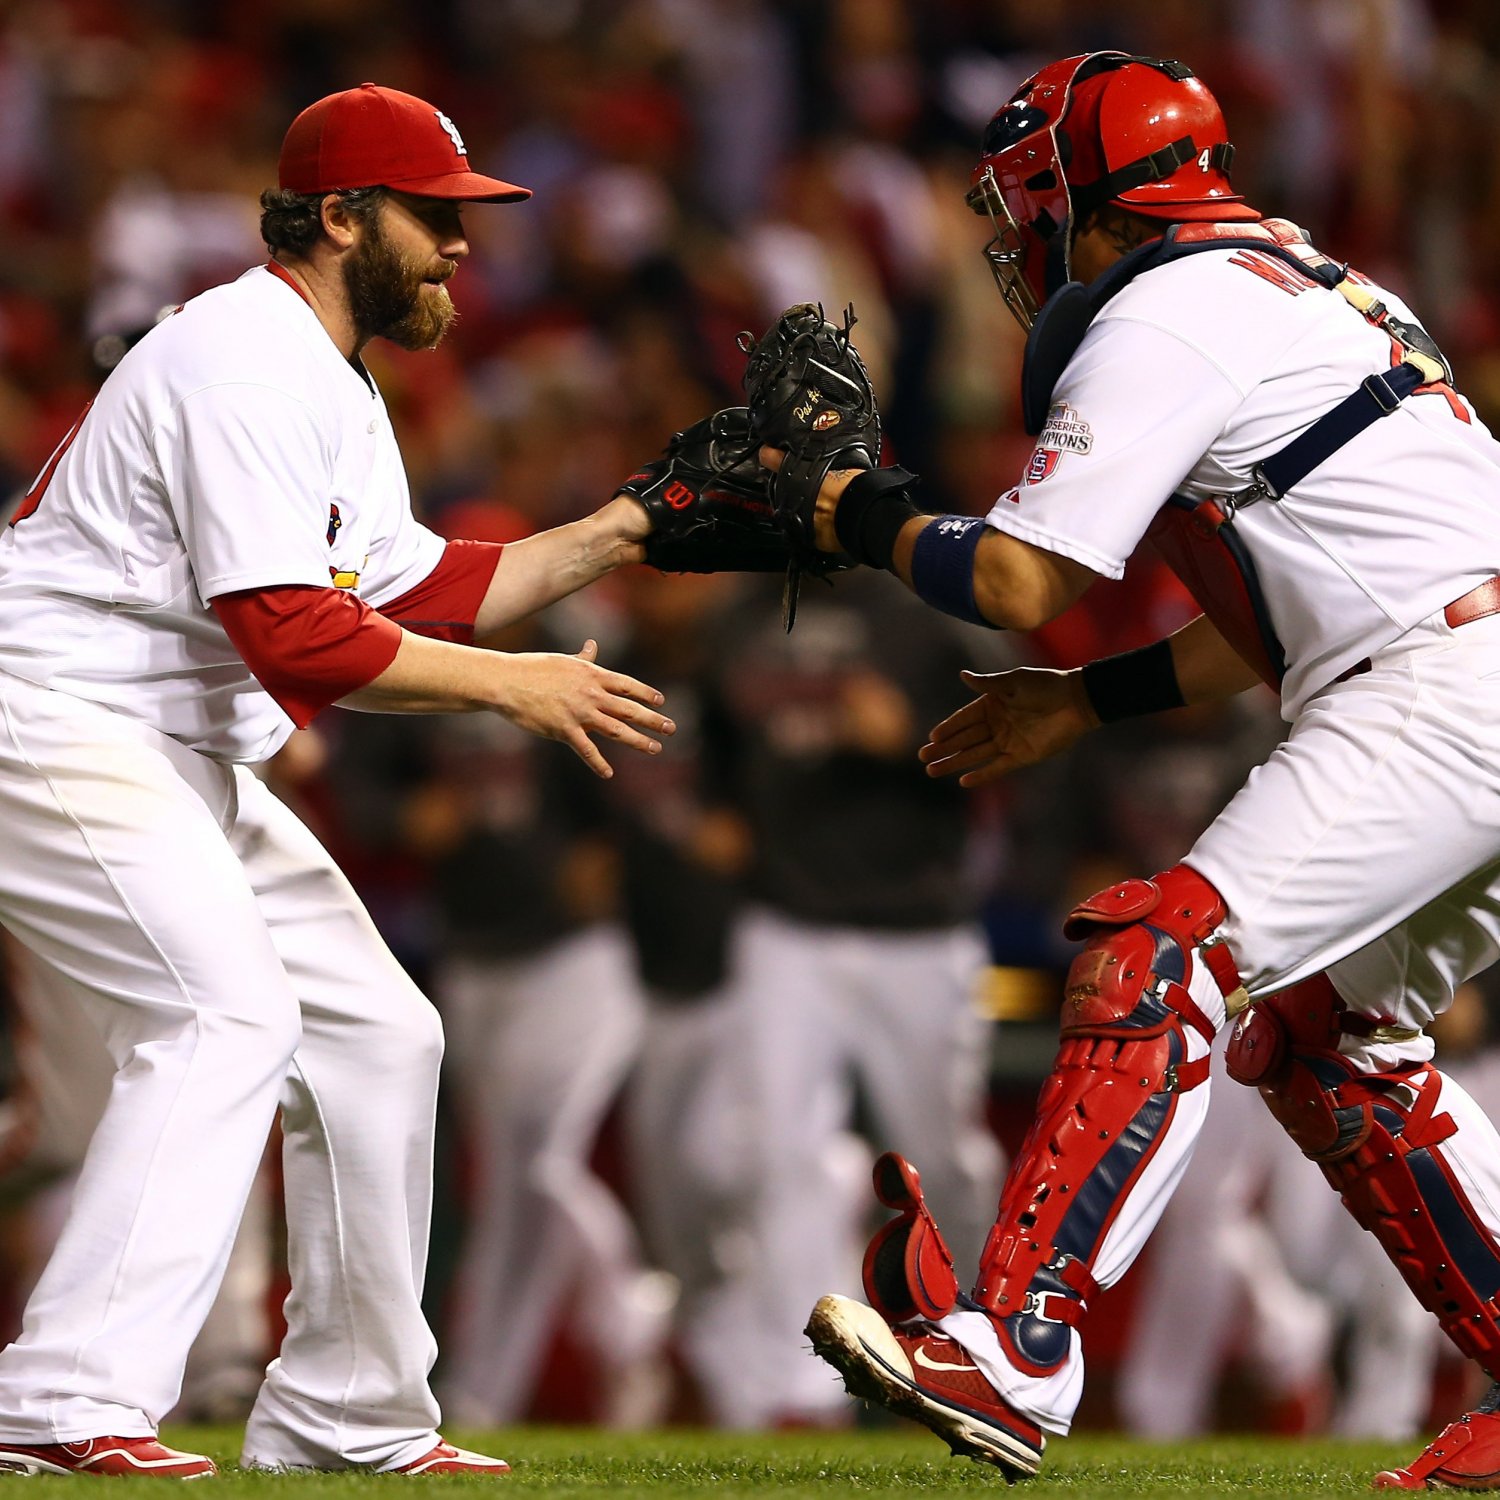 MLB Playoffs: Previewing the Cardinals vs. Giants Game 4 | Bleacher Report